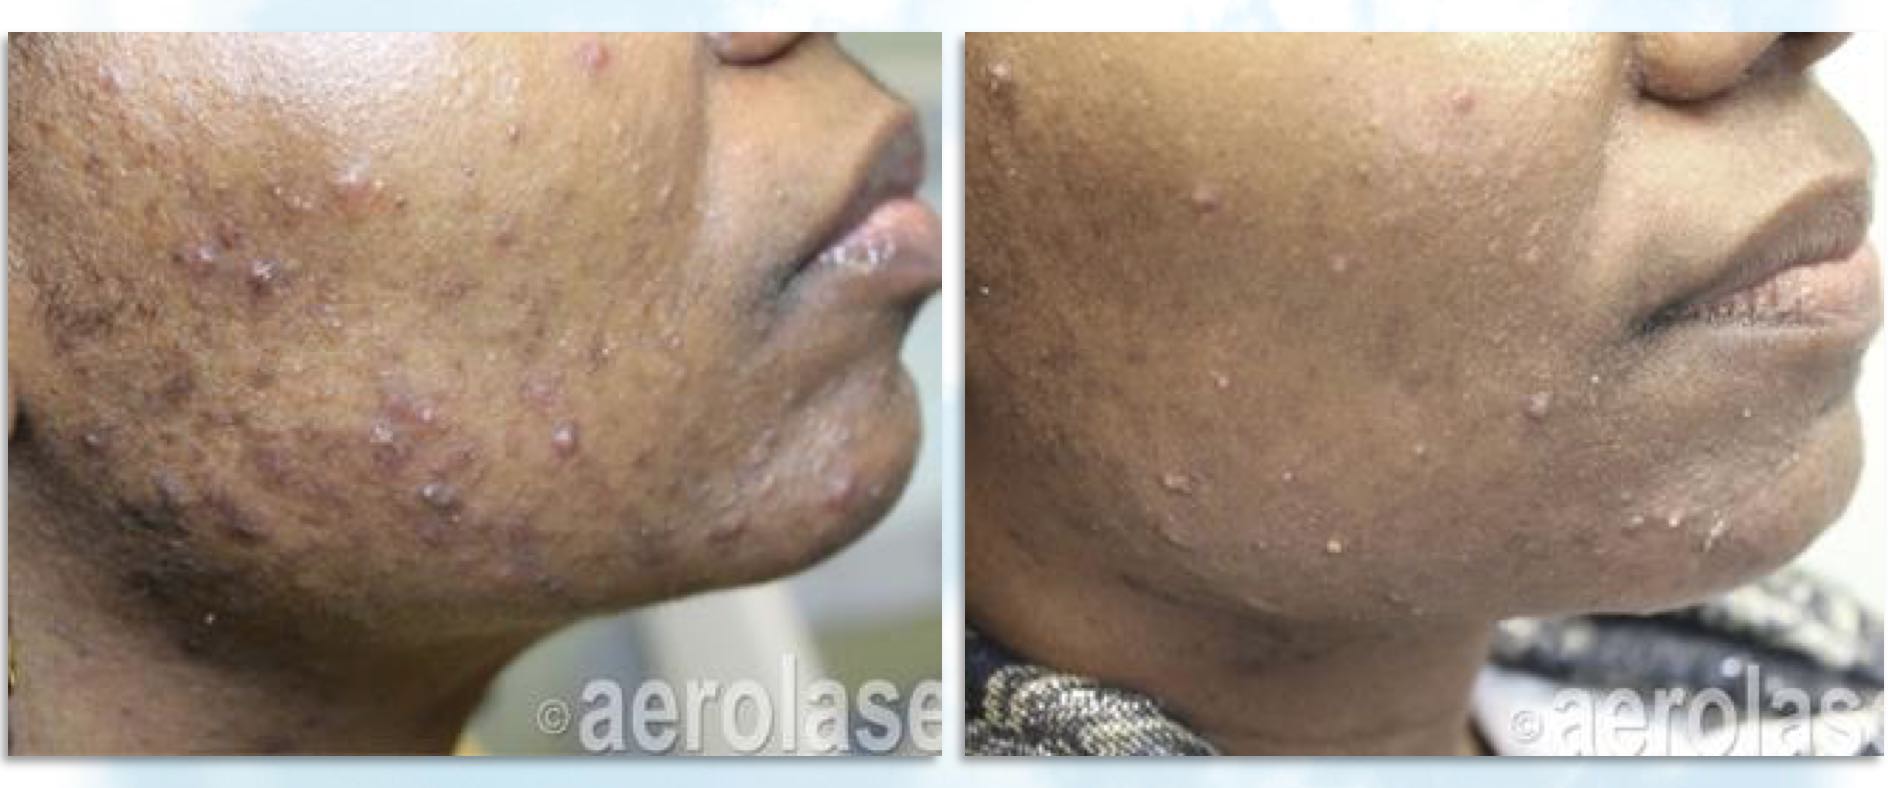 Cystic Acne in skin of color treatment Dr BCK Patel MD, FRCS Plastic Surgeon, Salt Lake City and St. George UtahPicture